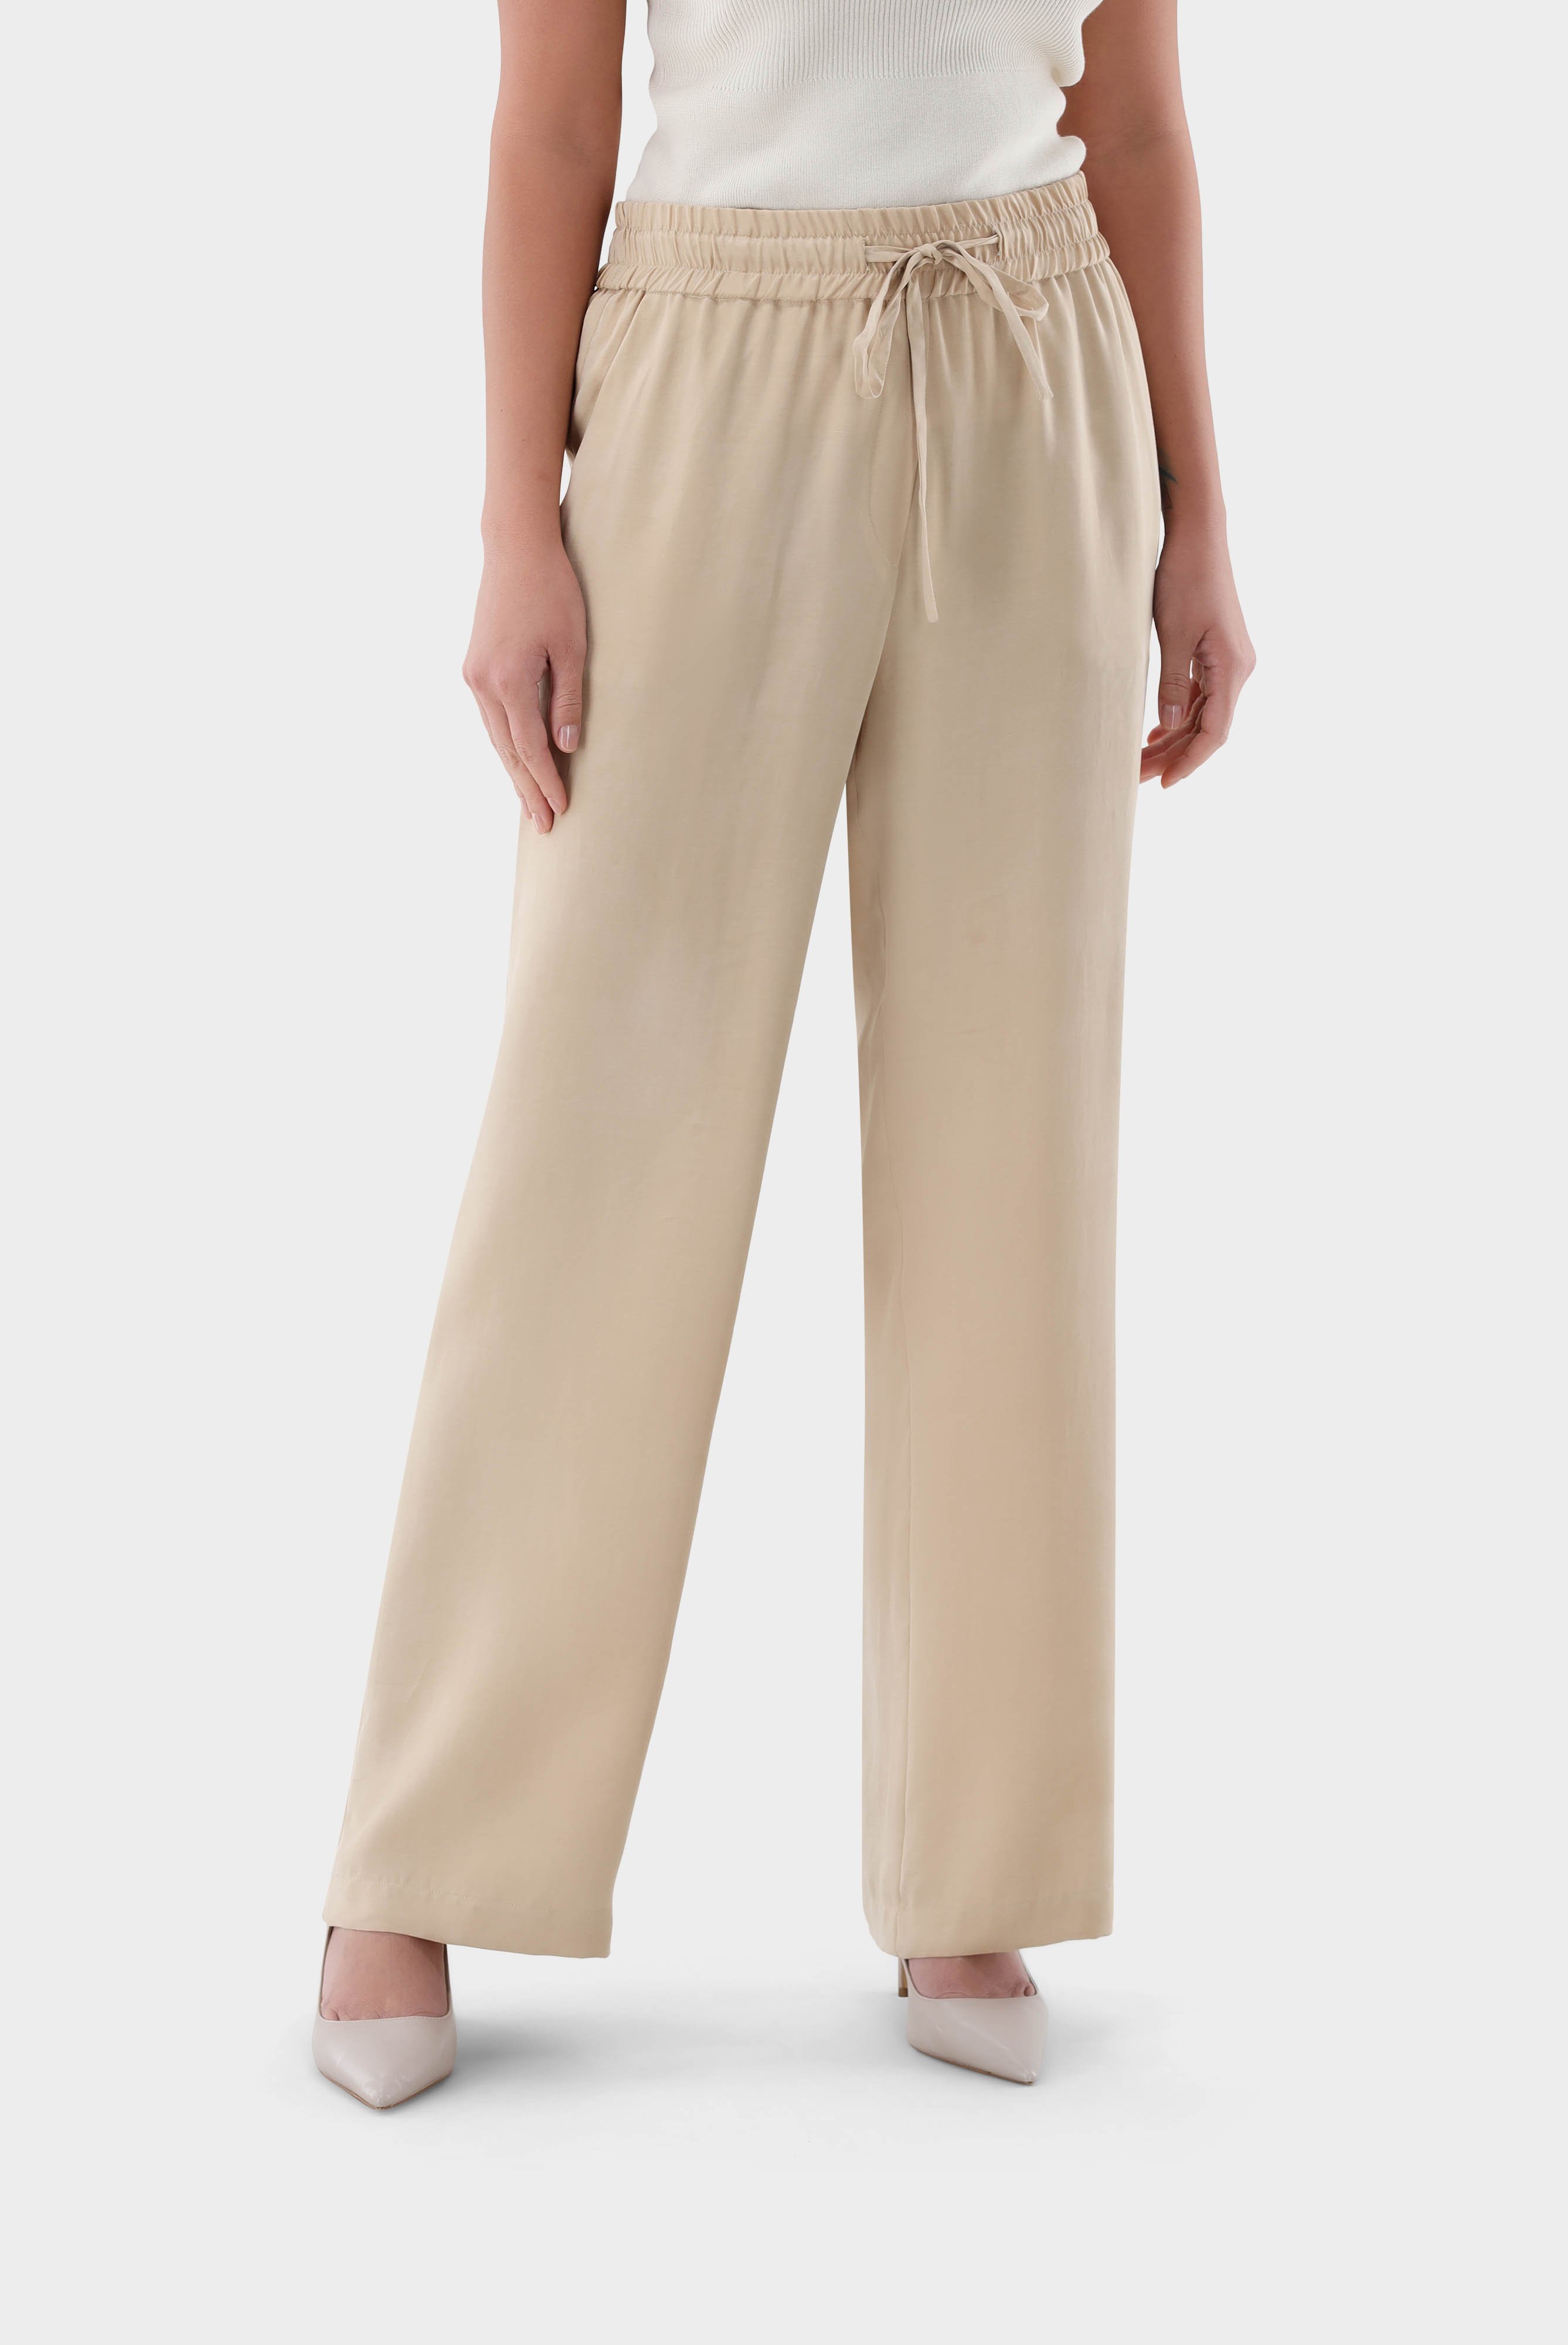 Jeans & Trousers+Palazzo trousers+05.6743..155007.250.34